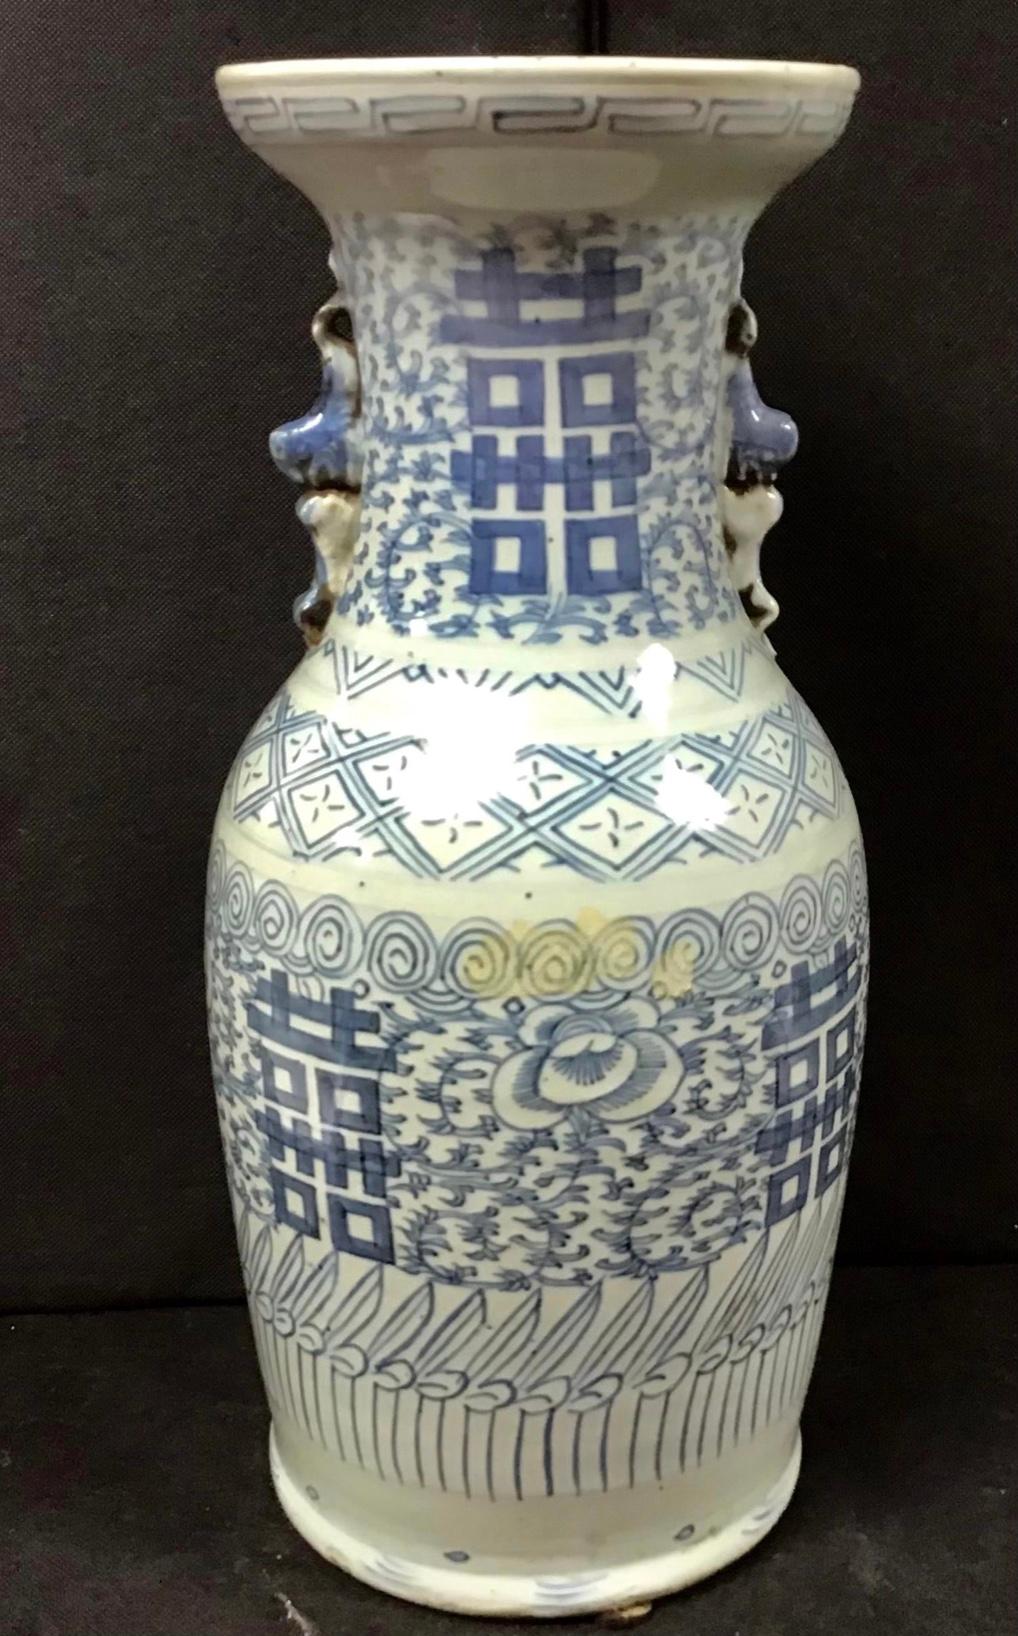 This blue-and-white porcelain vase stands tall with broad shoulders that taper to a splayed base. Bordered by a simple meander at the neck, the jar is decorated with a dense pattern of orchid blossoms and trailing vines. On each side of the jar, the